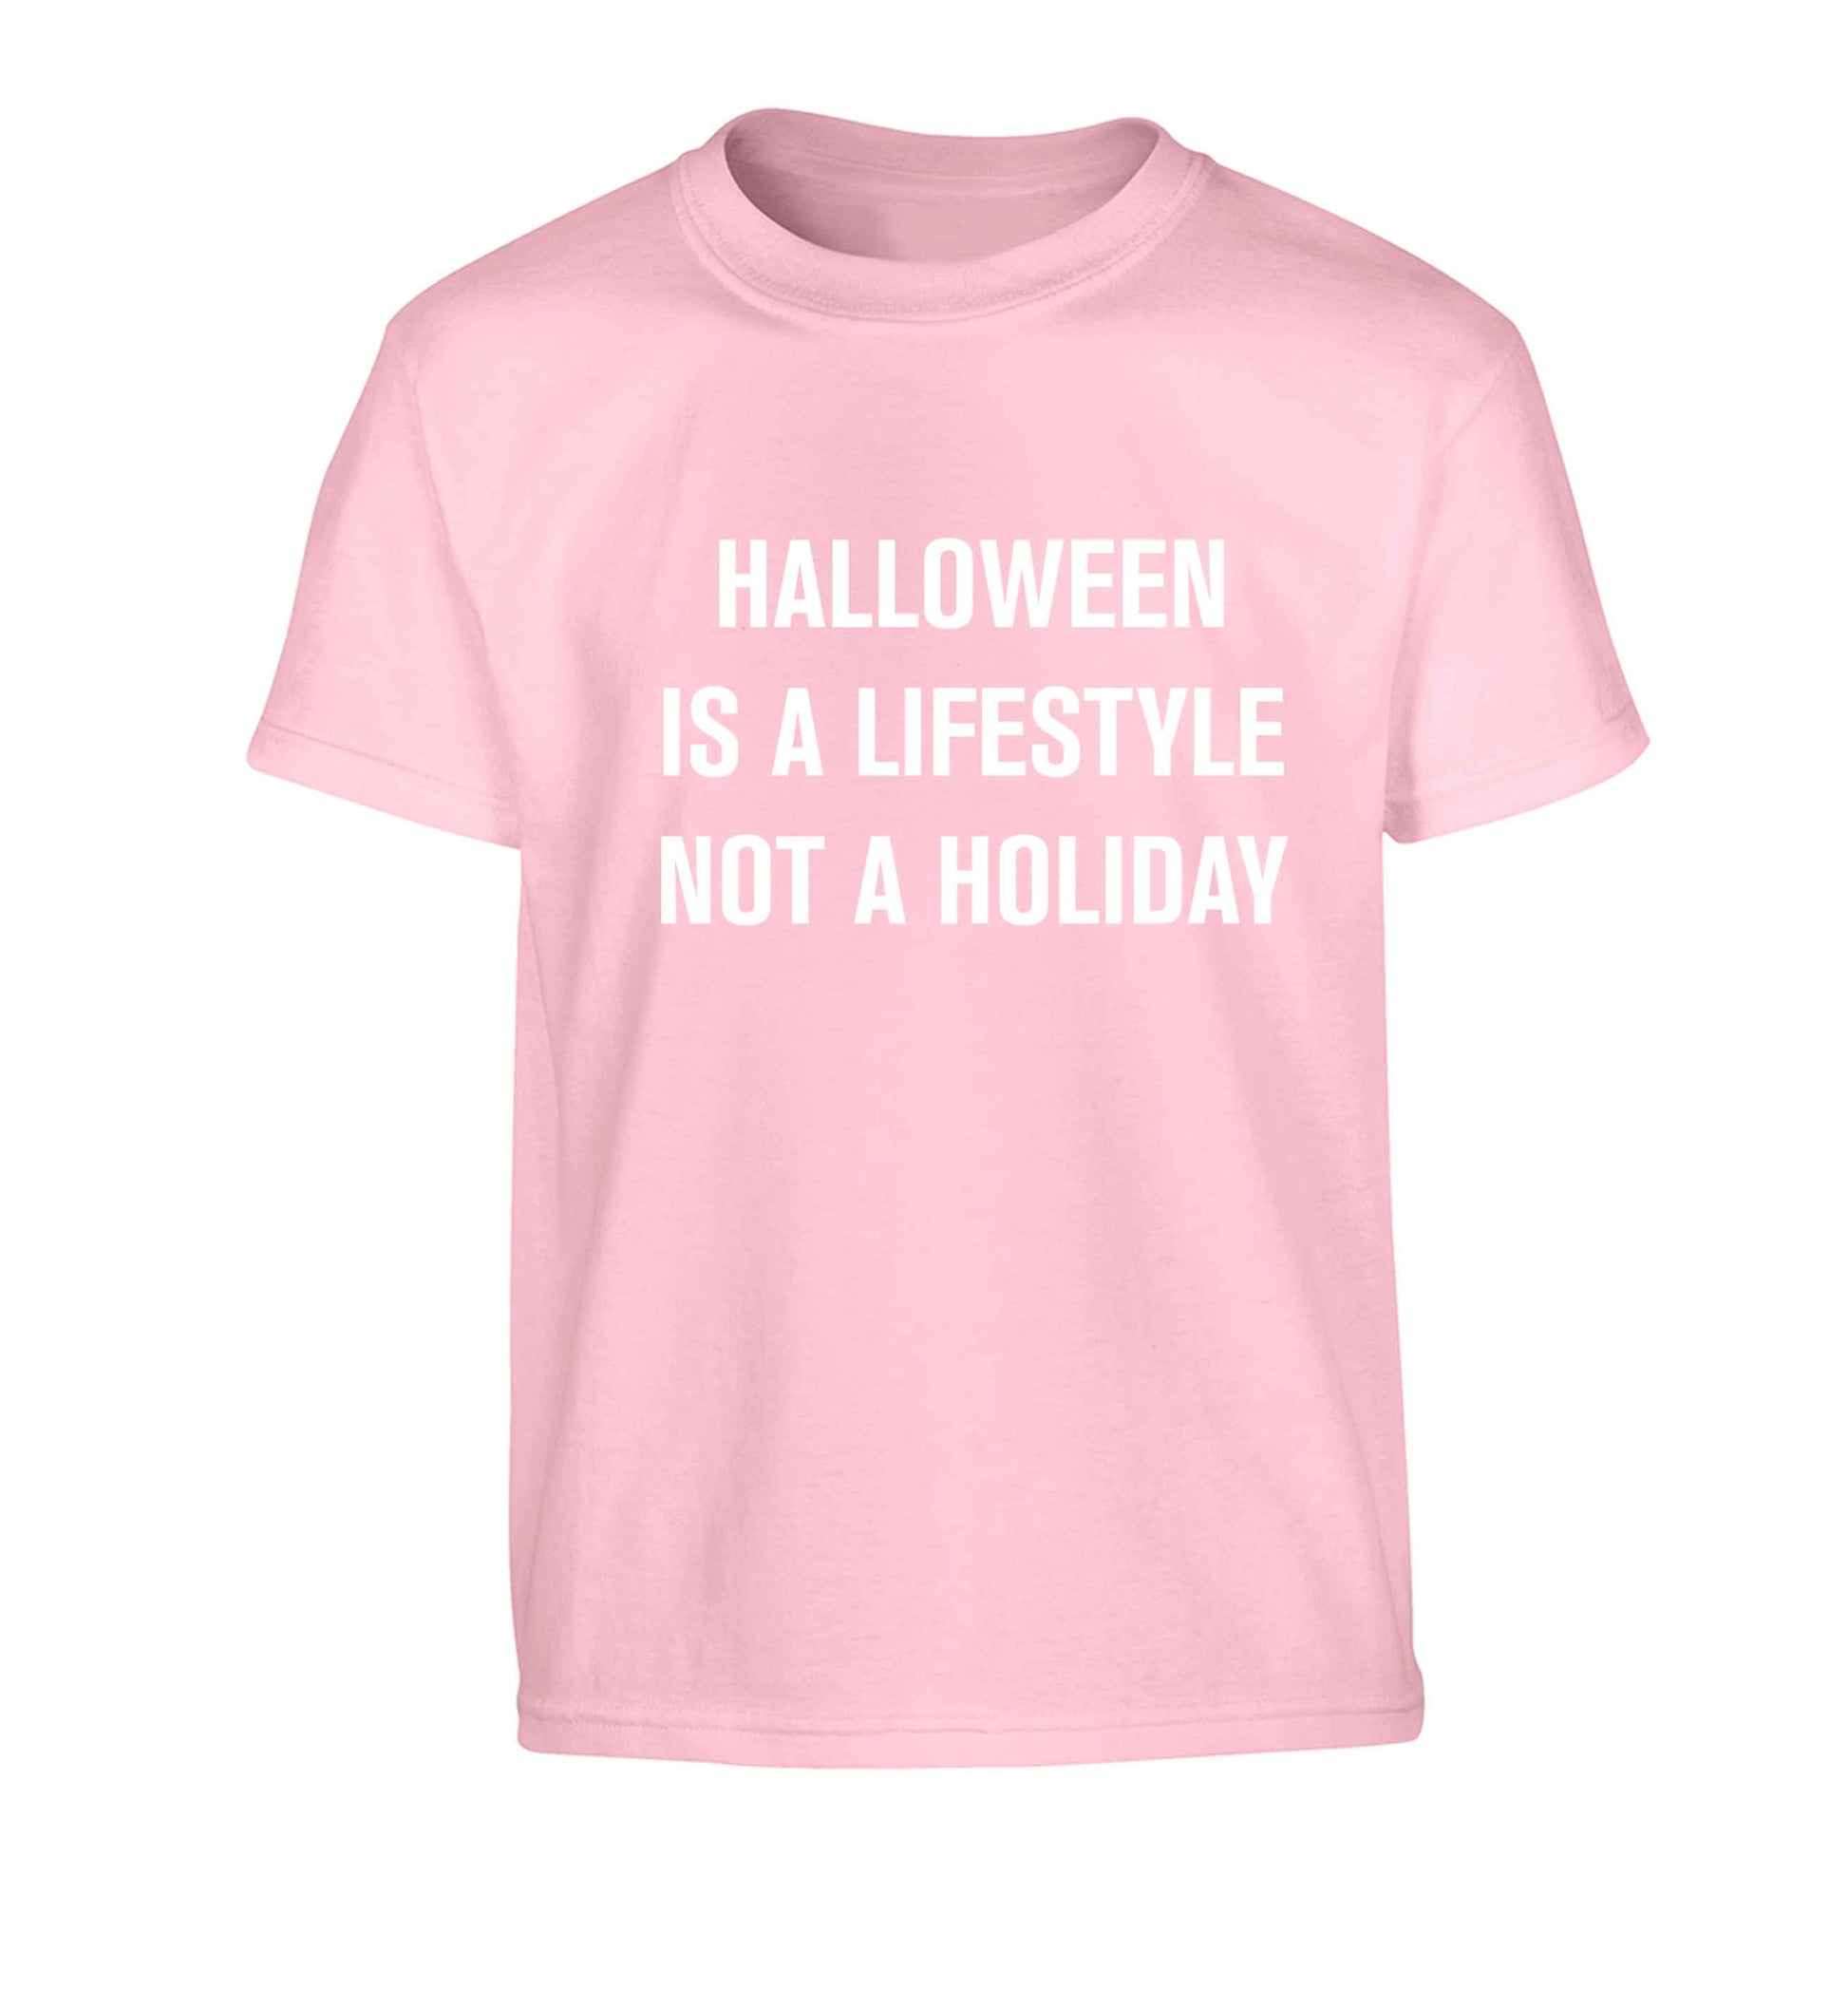 Halloween is a lifestyle not a holiday Children's light pink Tshirt 12-13 Years